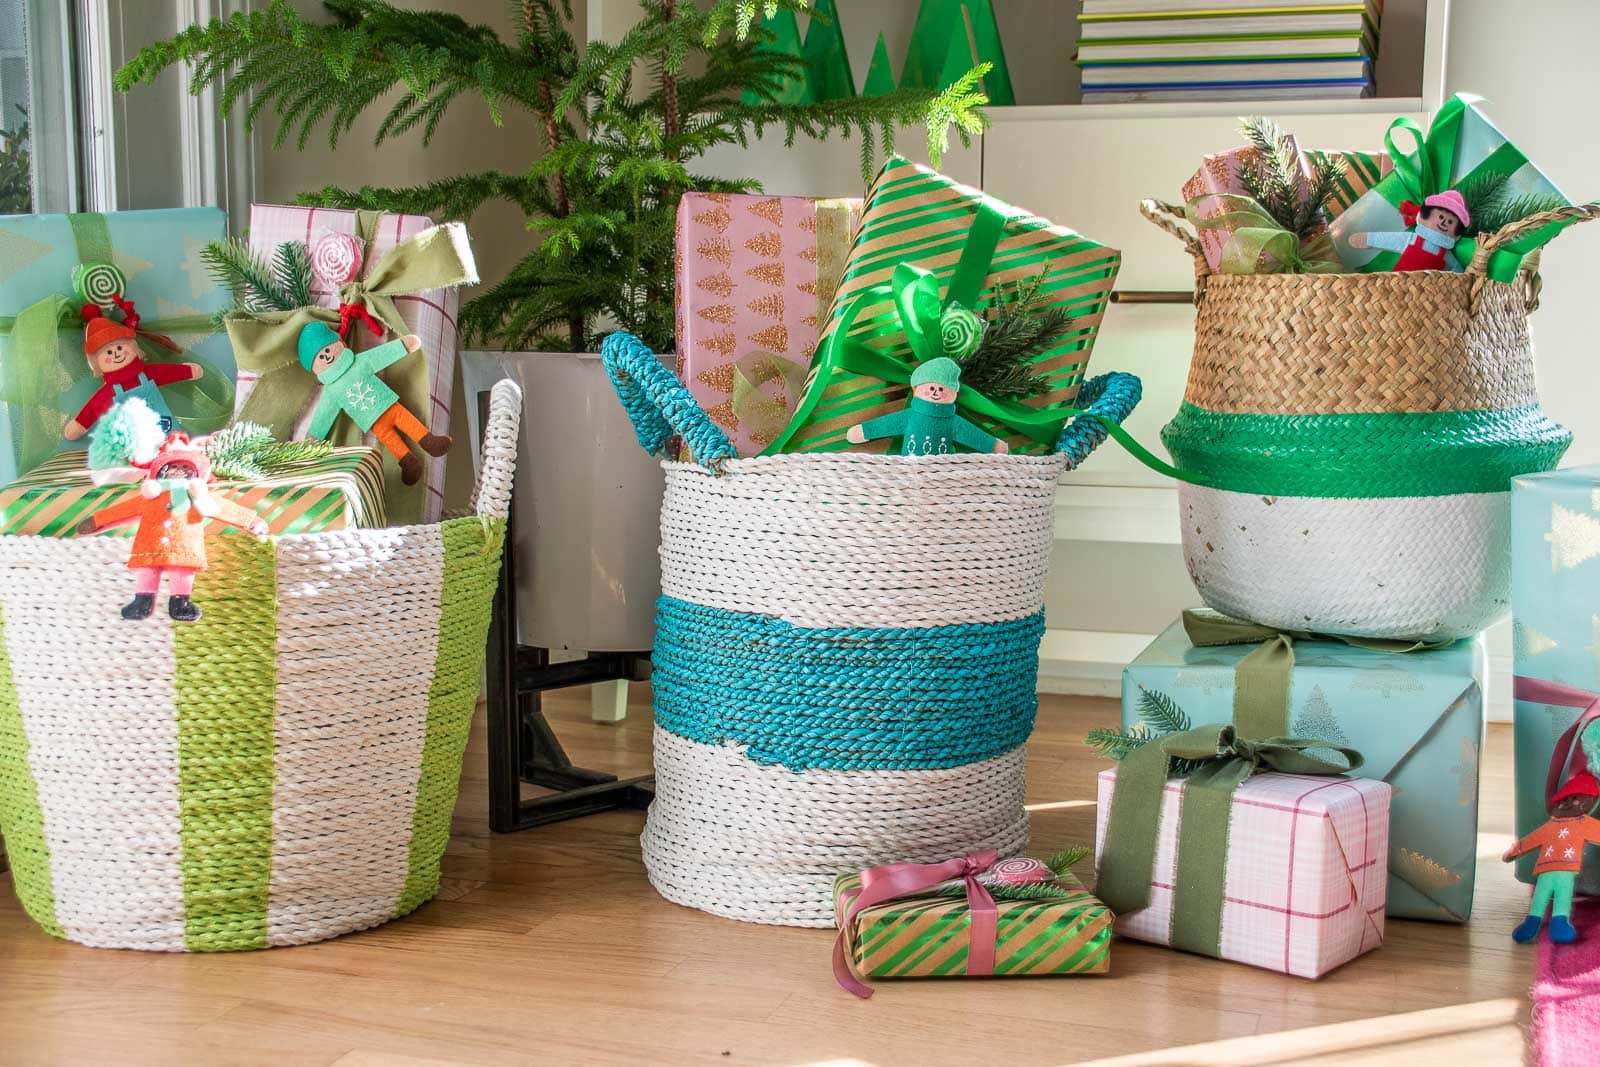 painted striped baskets